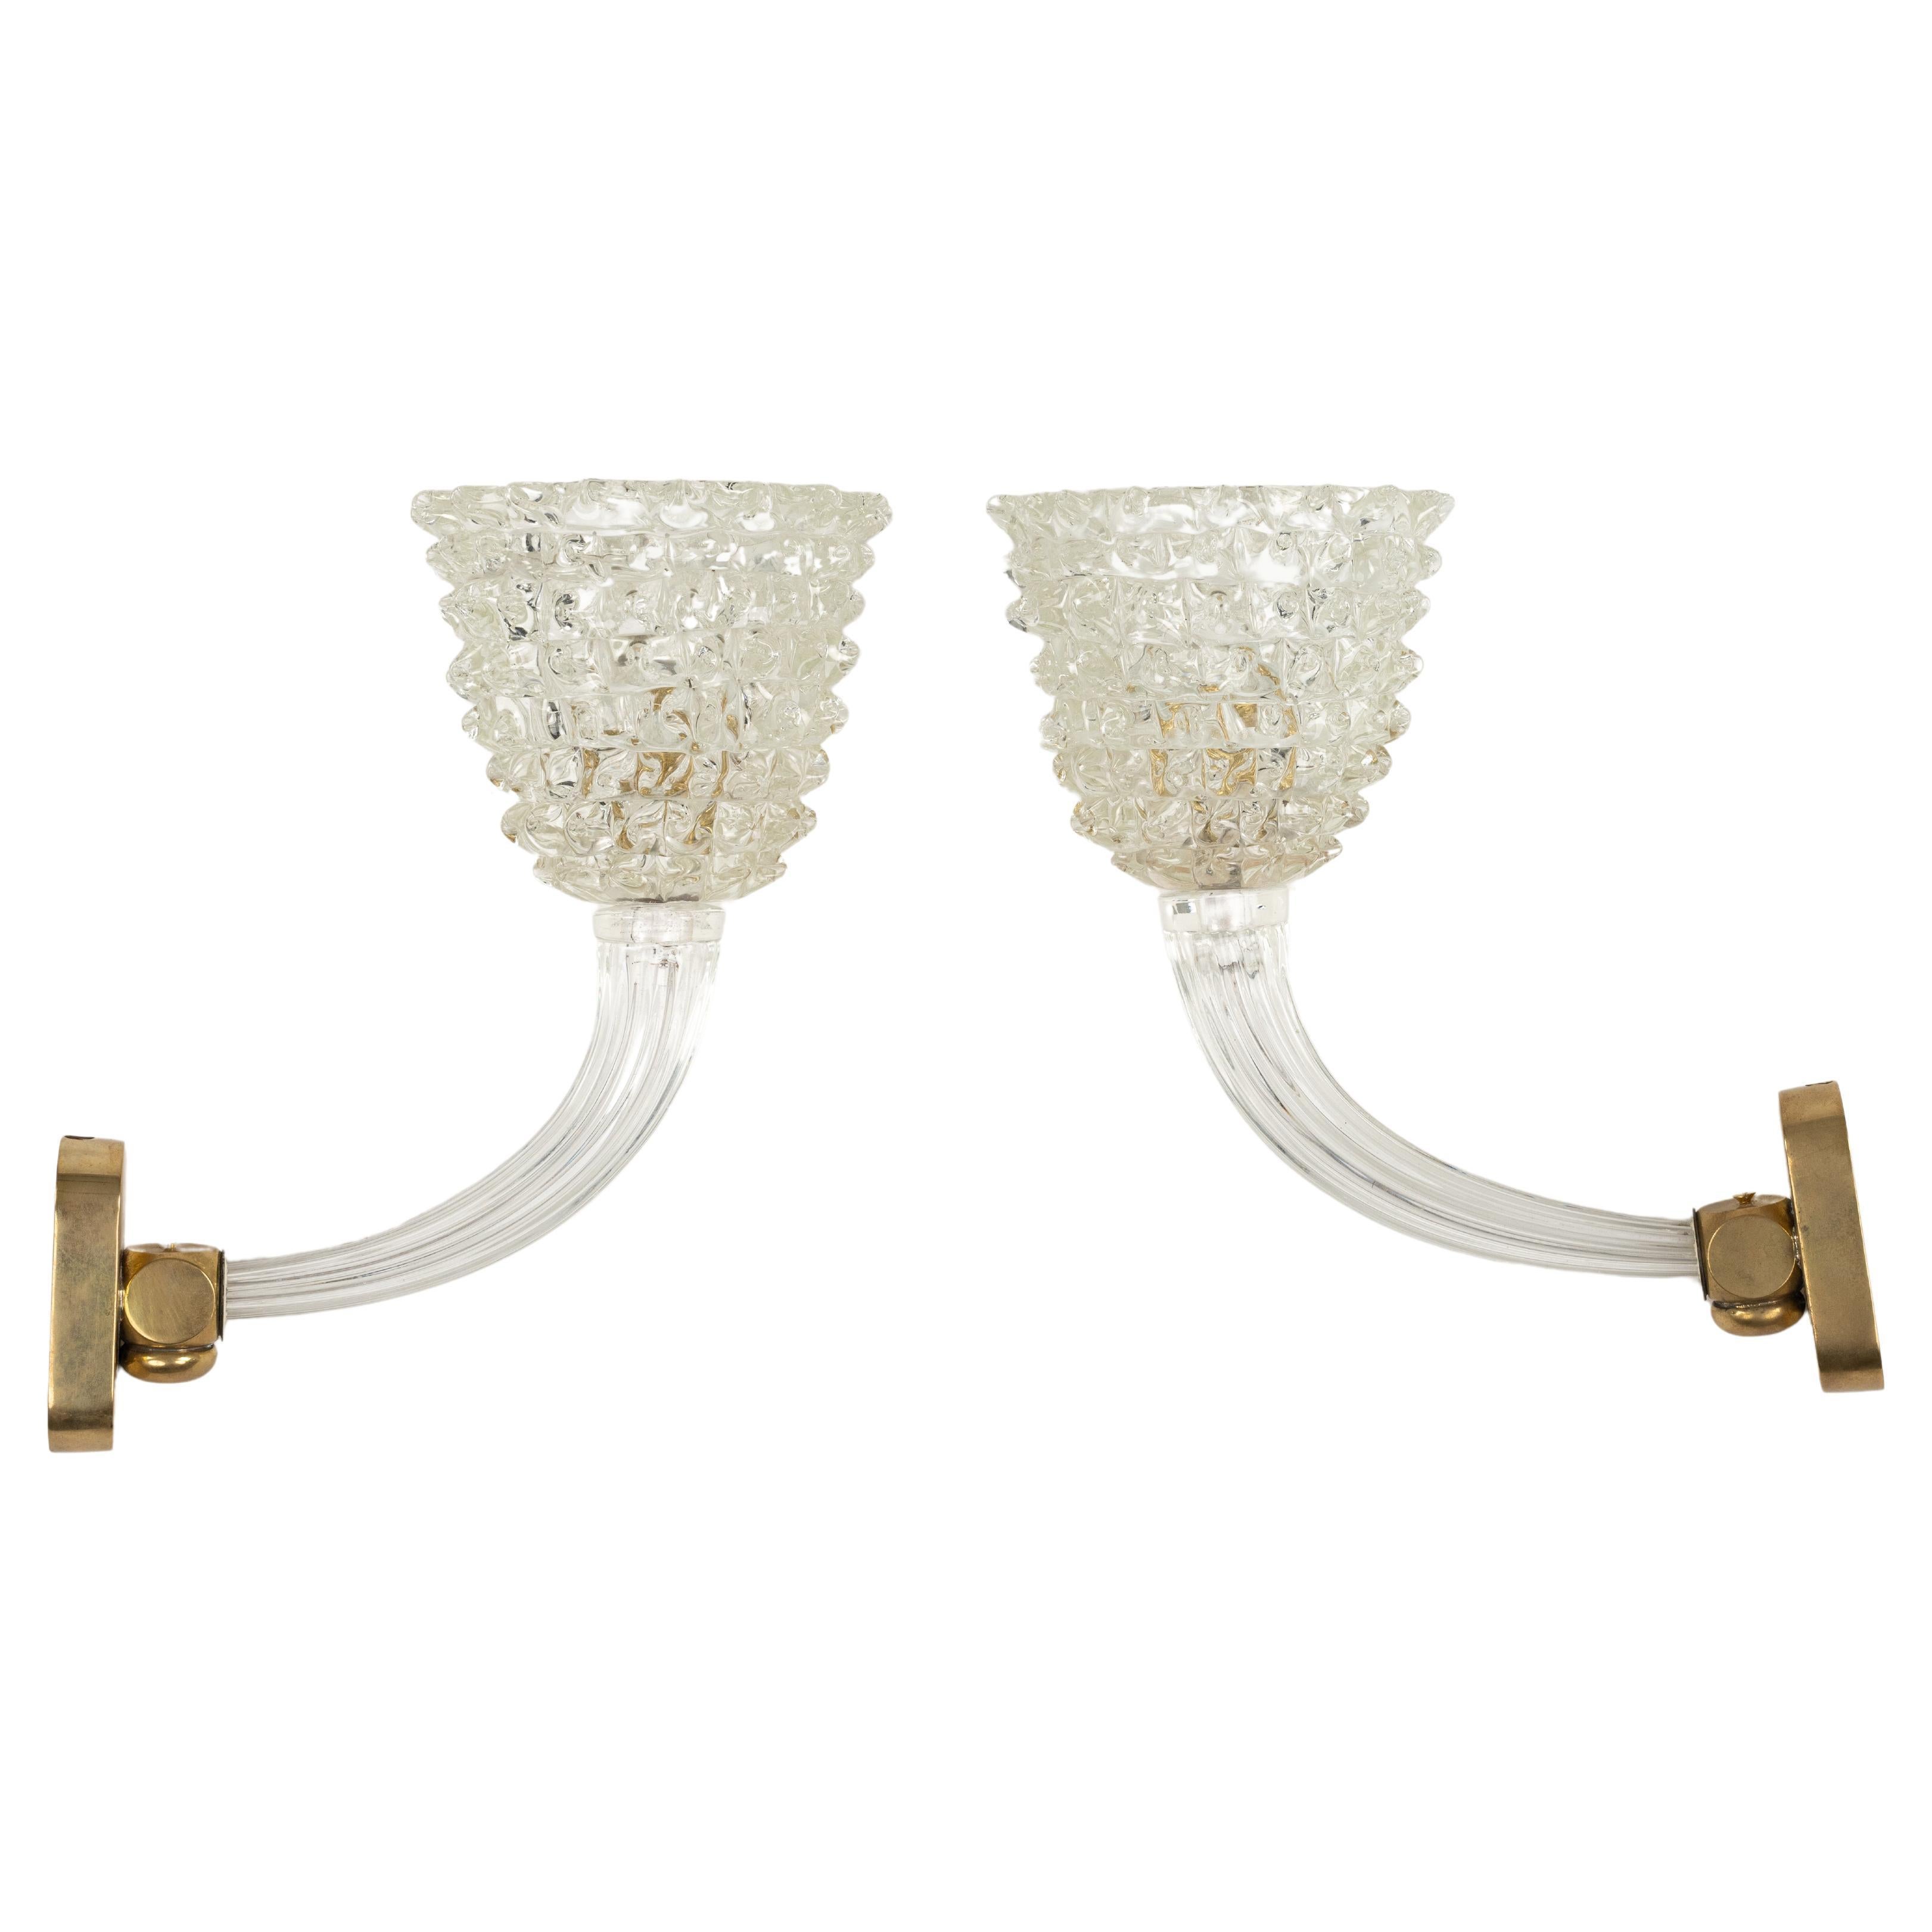 Pair of Sconces Rostrato Murano Glass & Brass Barovier & Toso Style, Italy 1950s